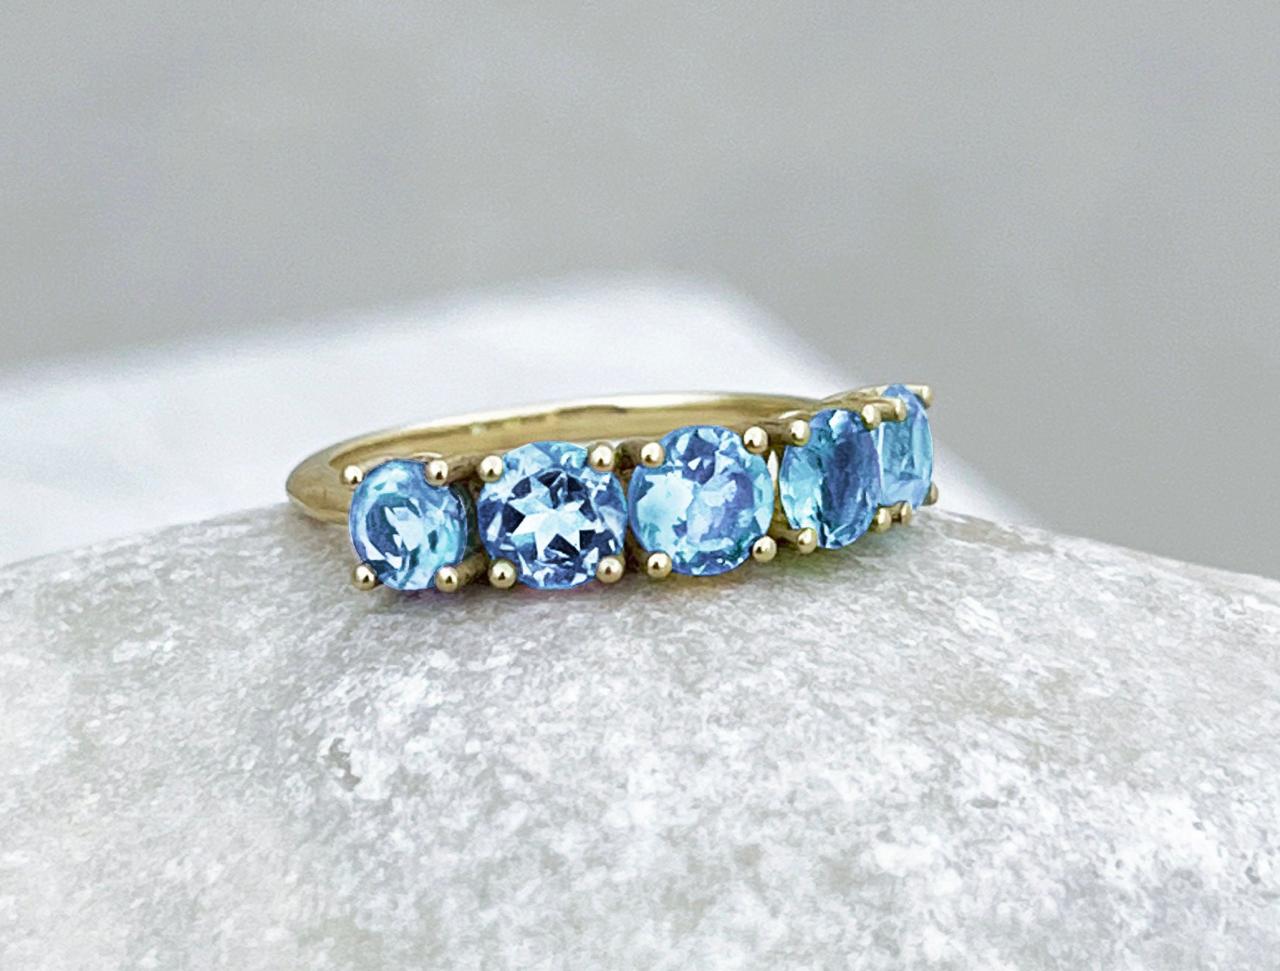 Solid Gold Engagement Ring With Blue Topaz, Bridesmaid Half Band Ring With Light Blue Gemstone, 18k Classic Prong Set Promise Ring